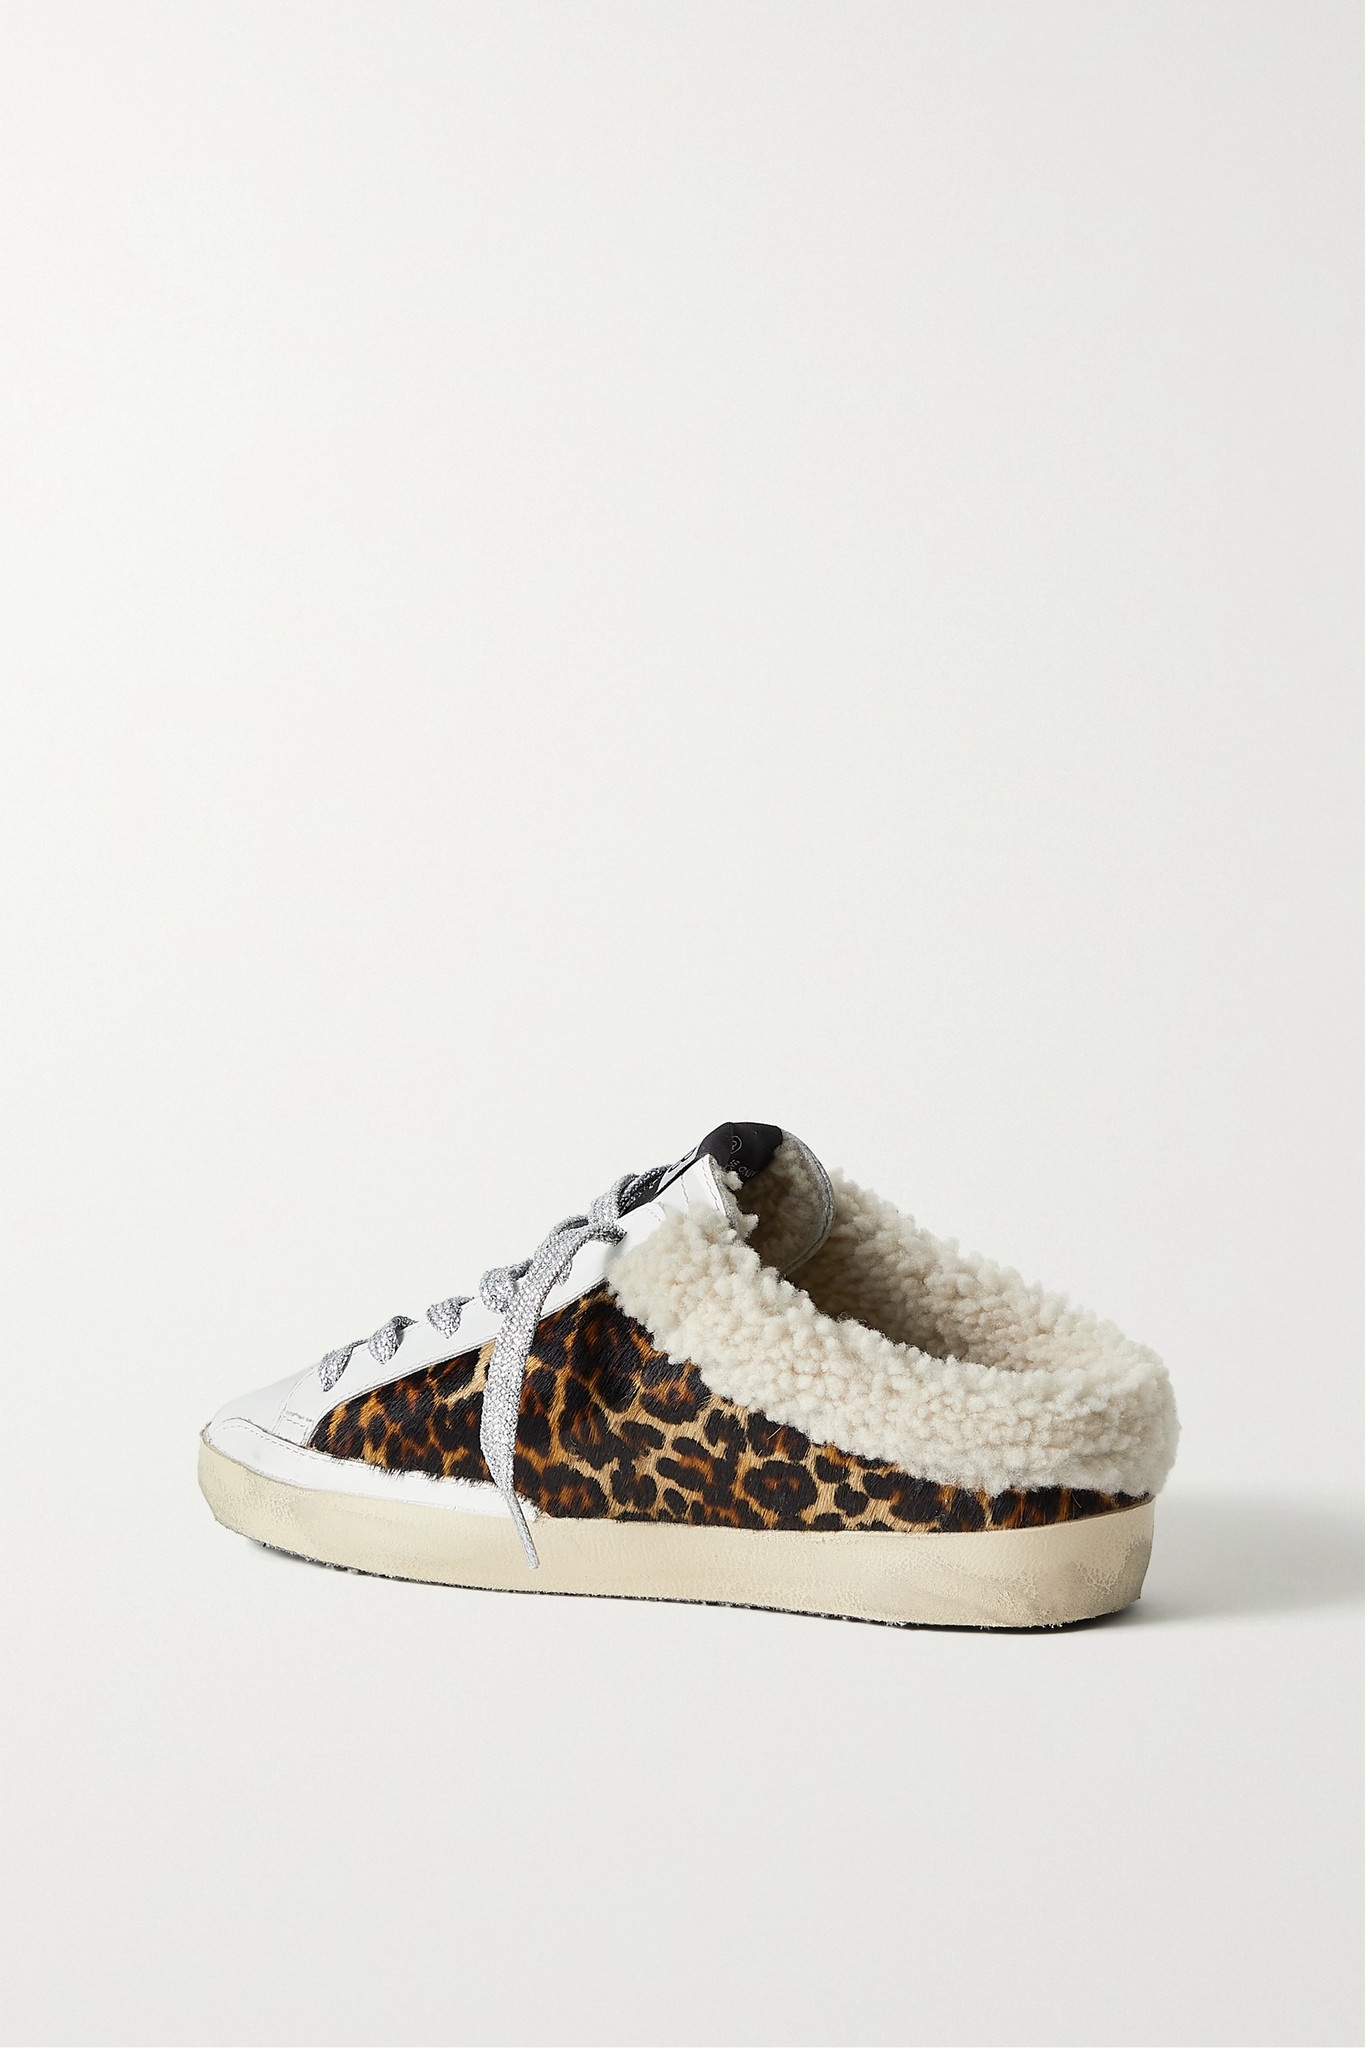 Superstar Sabot shearling-lined distressed glittered leather slip-on sneakers - 3